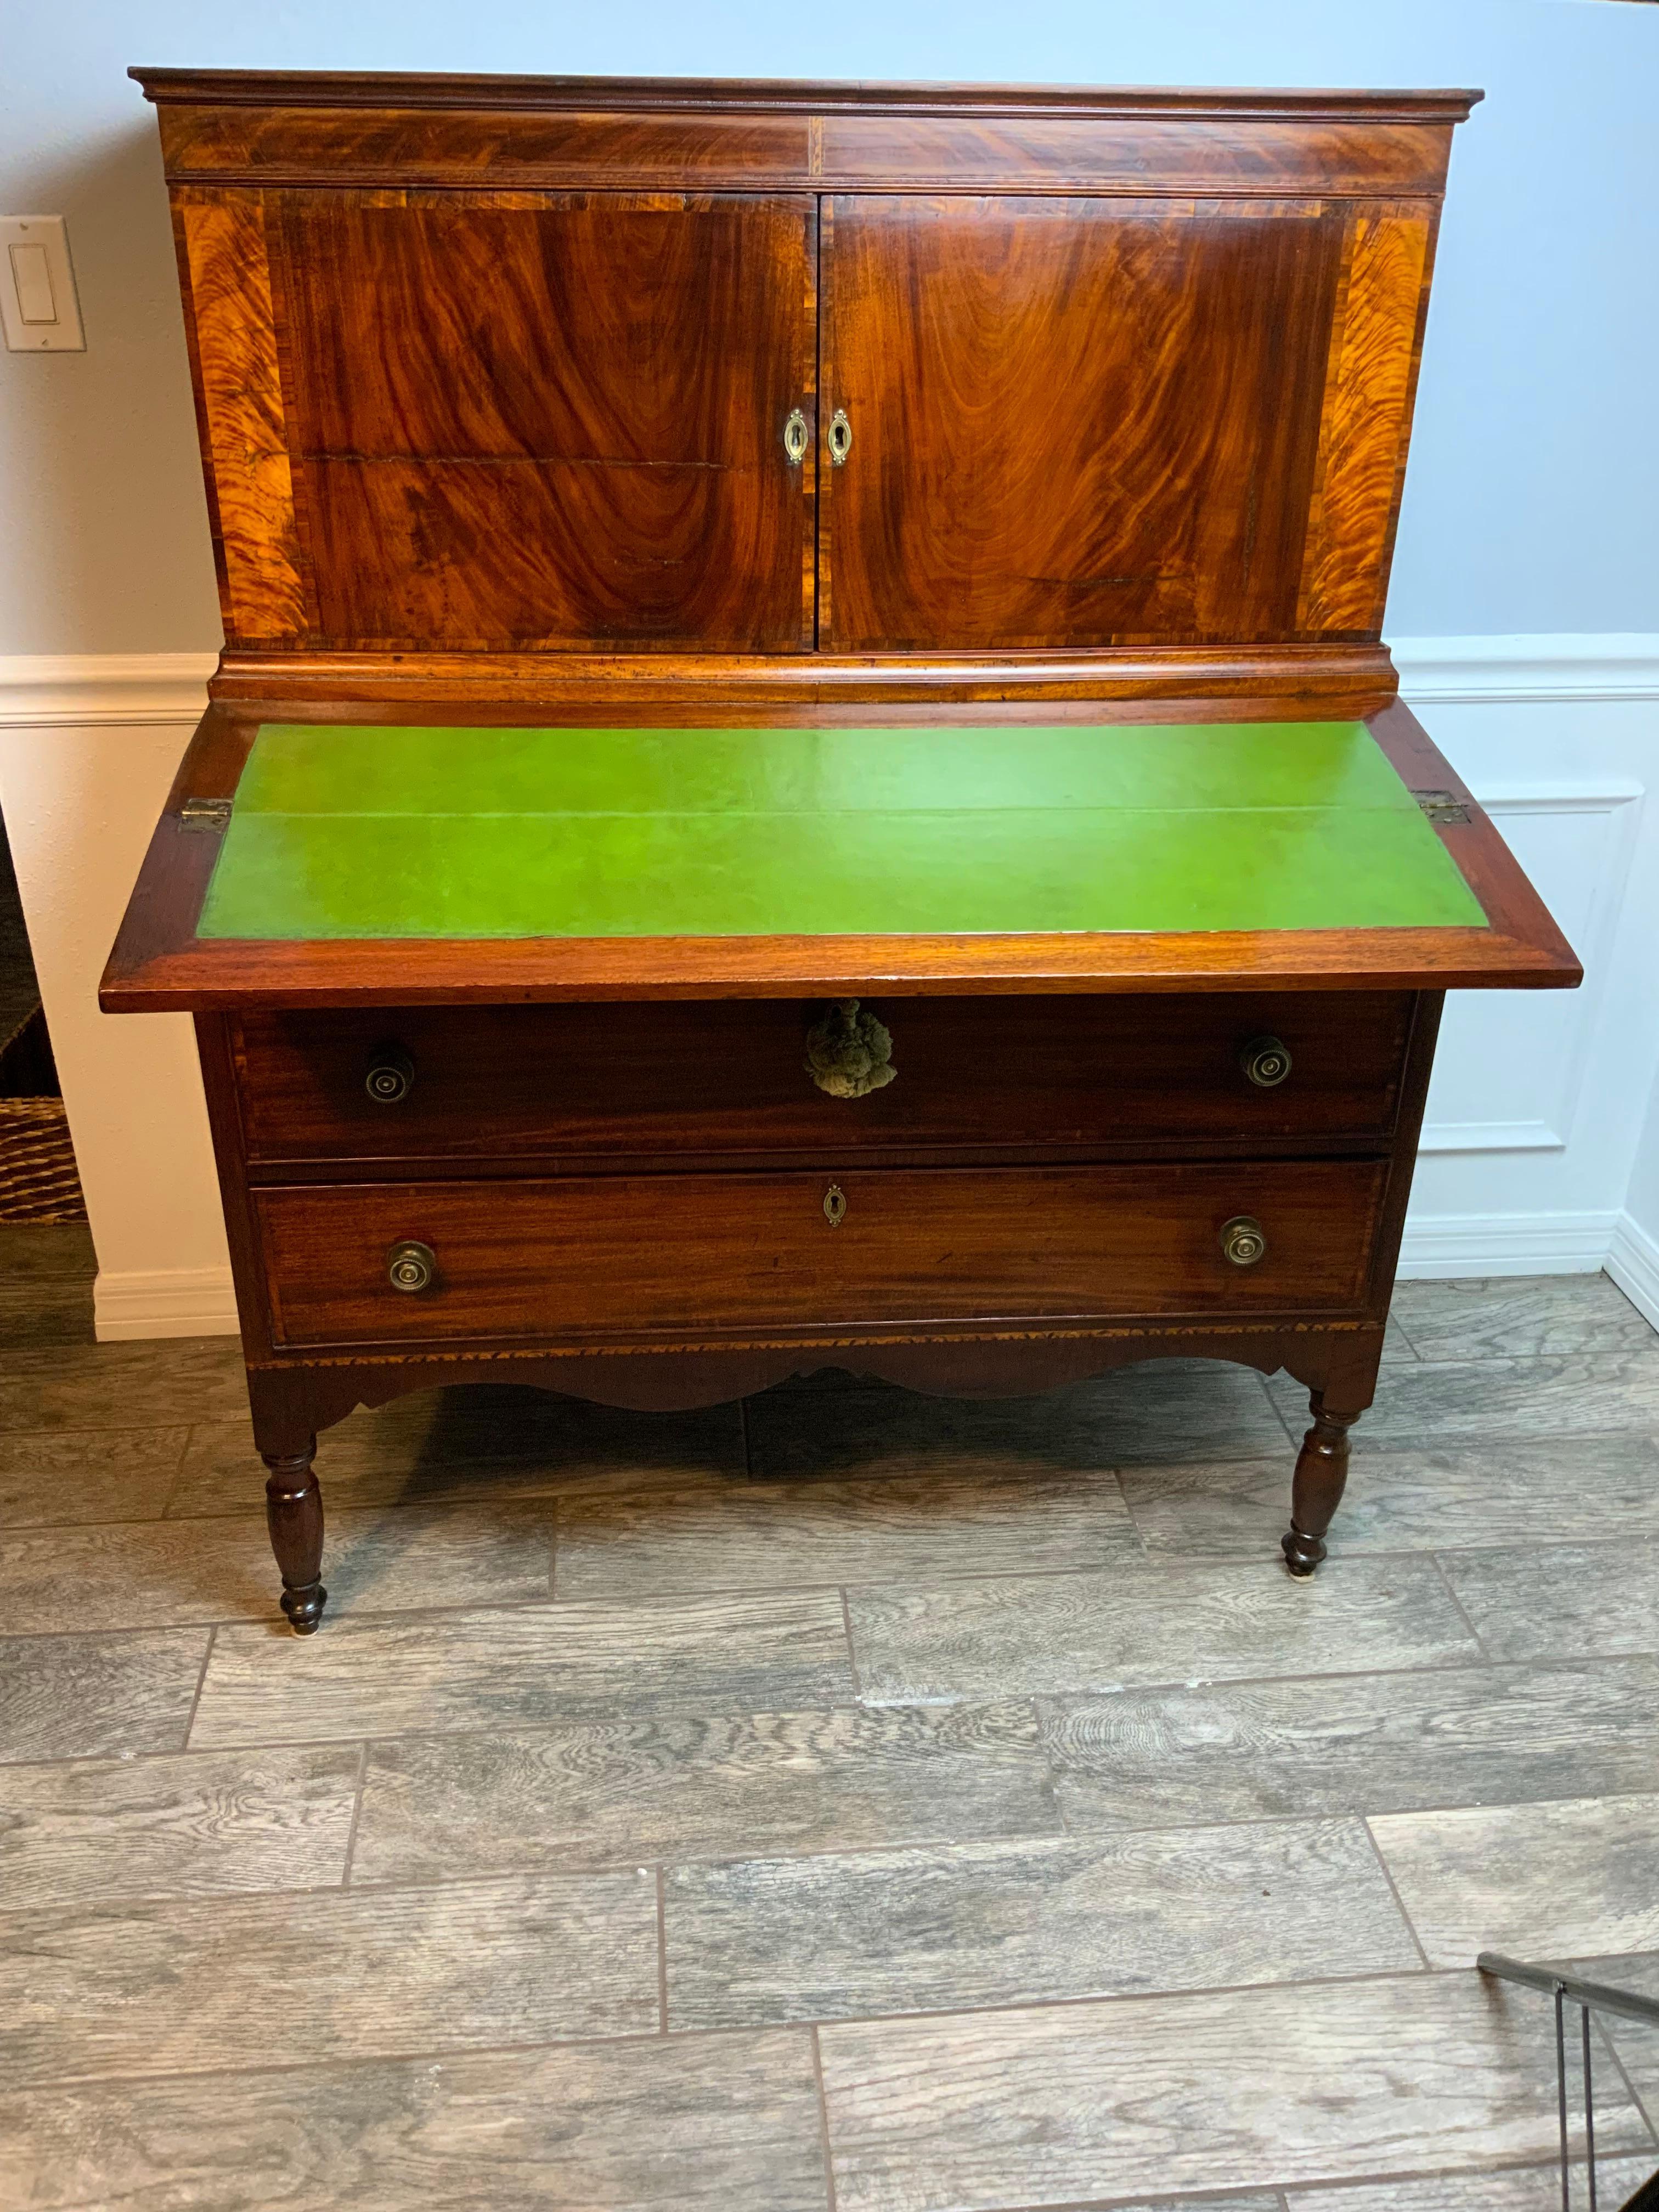 A very fine Sheraton Secretary Desk 1810-1820 in a old refinish with an excellent color and patina.  Decorative cross banded veneers and inlay work throughout add to the beauty of this piece.  Beautifully cut scalloped apron on the front and sides. 